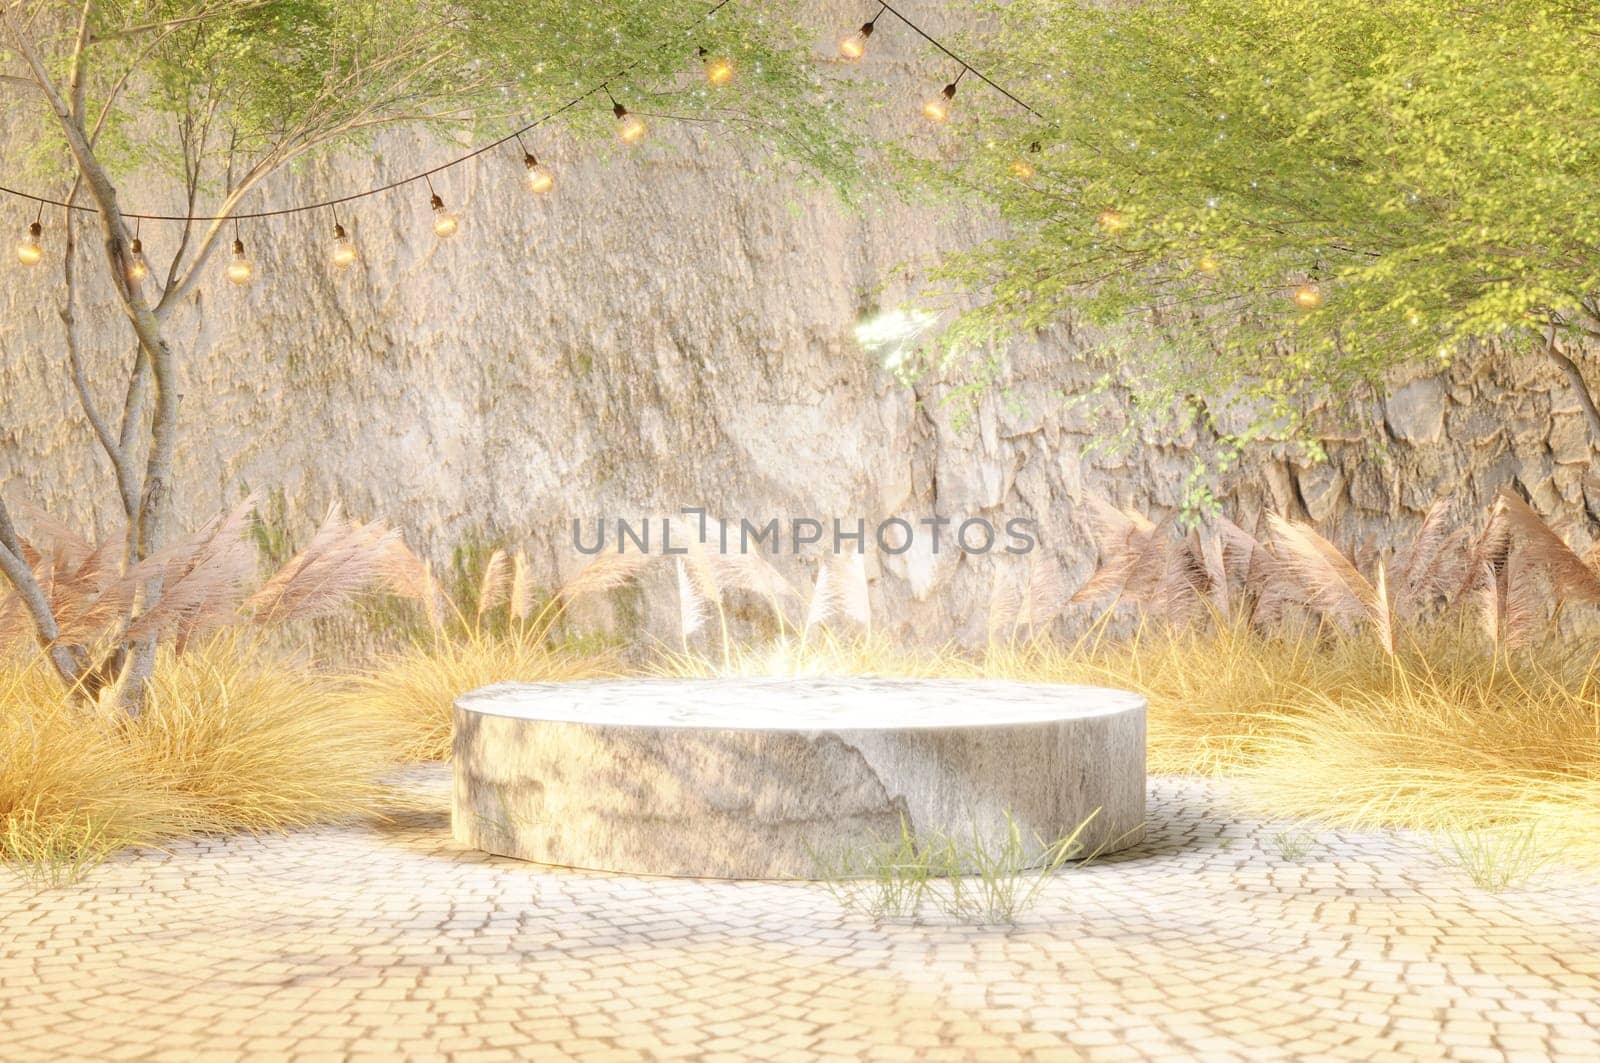 3D Illustration, podium or stand made from stone or concrete  in the grass 